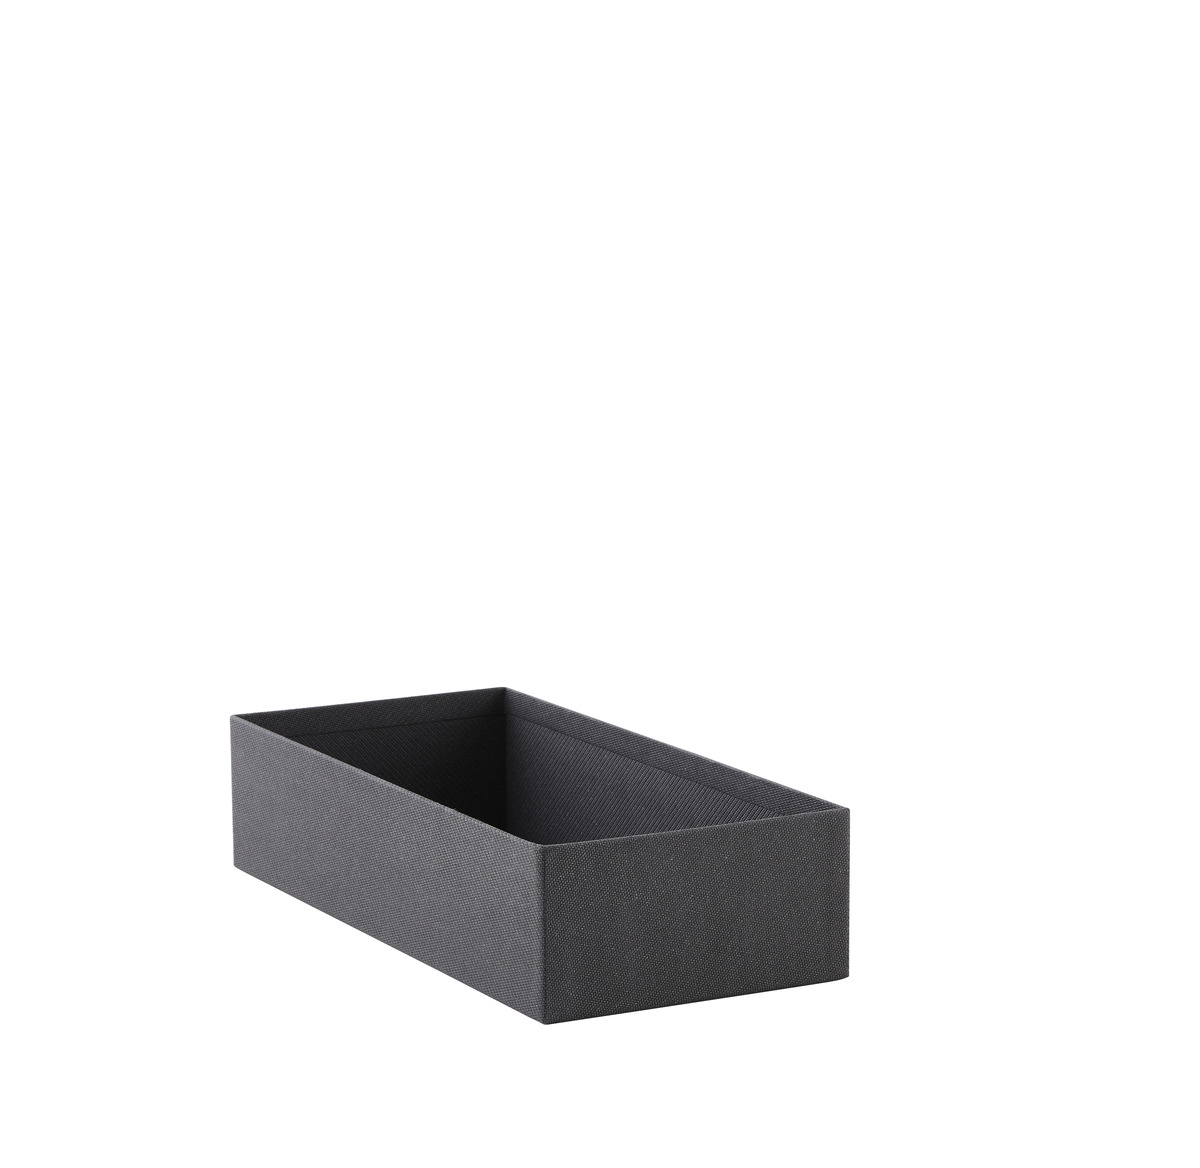 https://www.containerstore.com/catalogimages/408035/10077378-Avera-Bigso-Boxes-Charcoal-.jpg